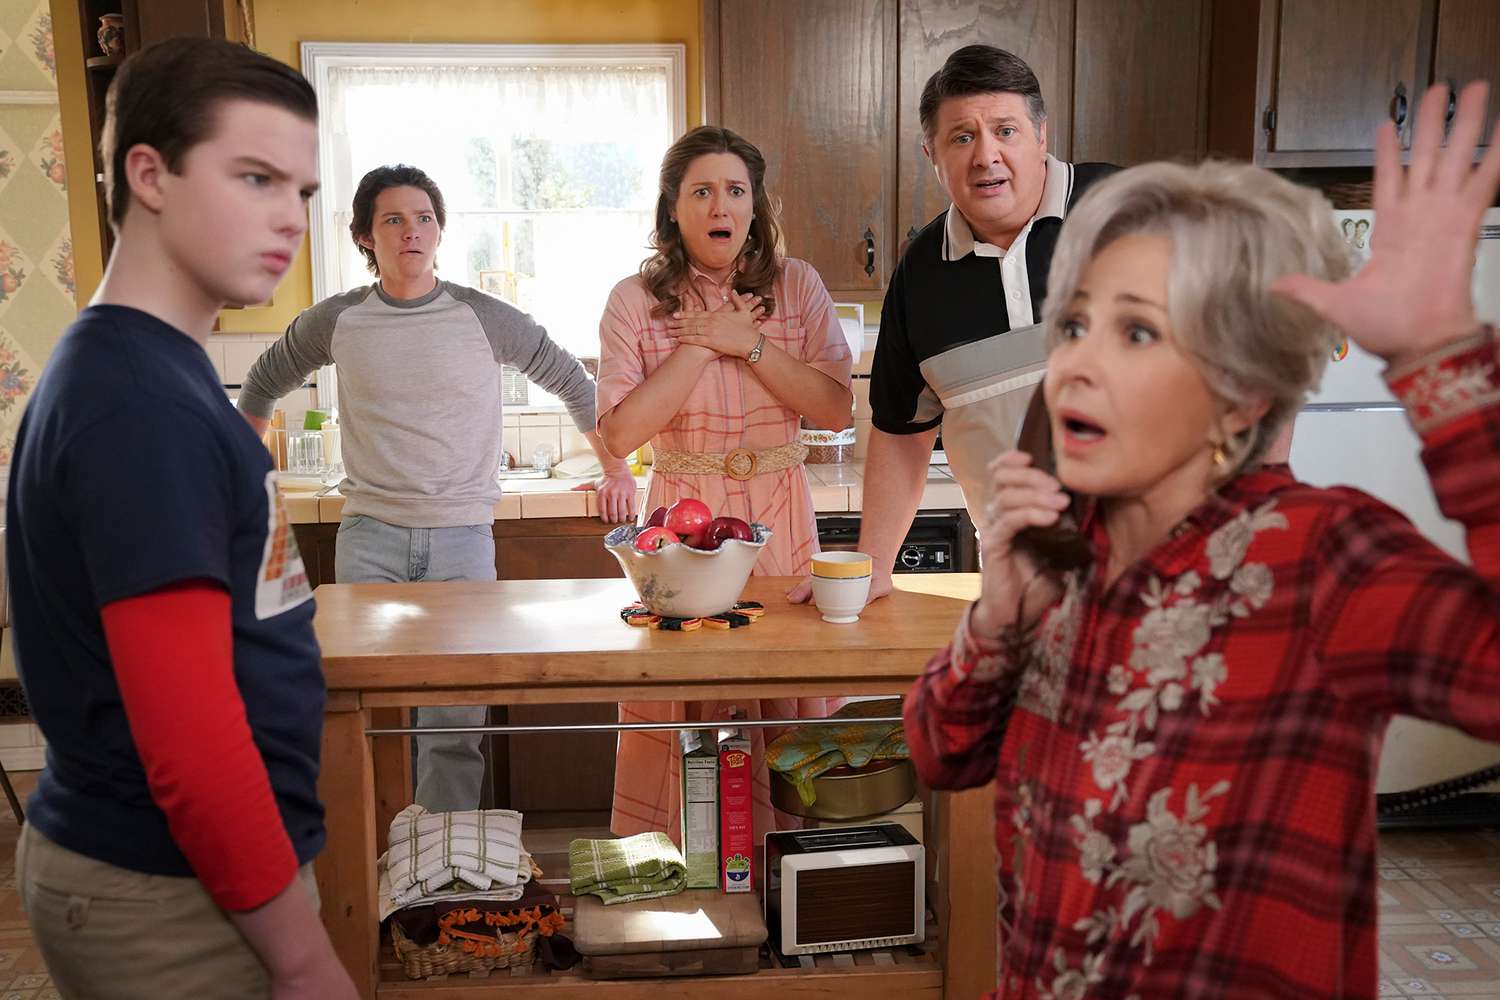 Everything Fans Must Know The Countdown to 'Young Sheldon' Season 7's Netflix Debut--